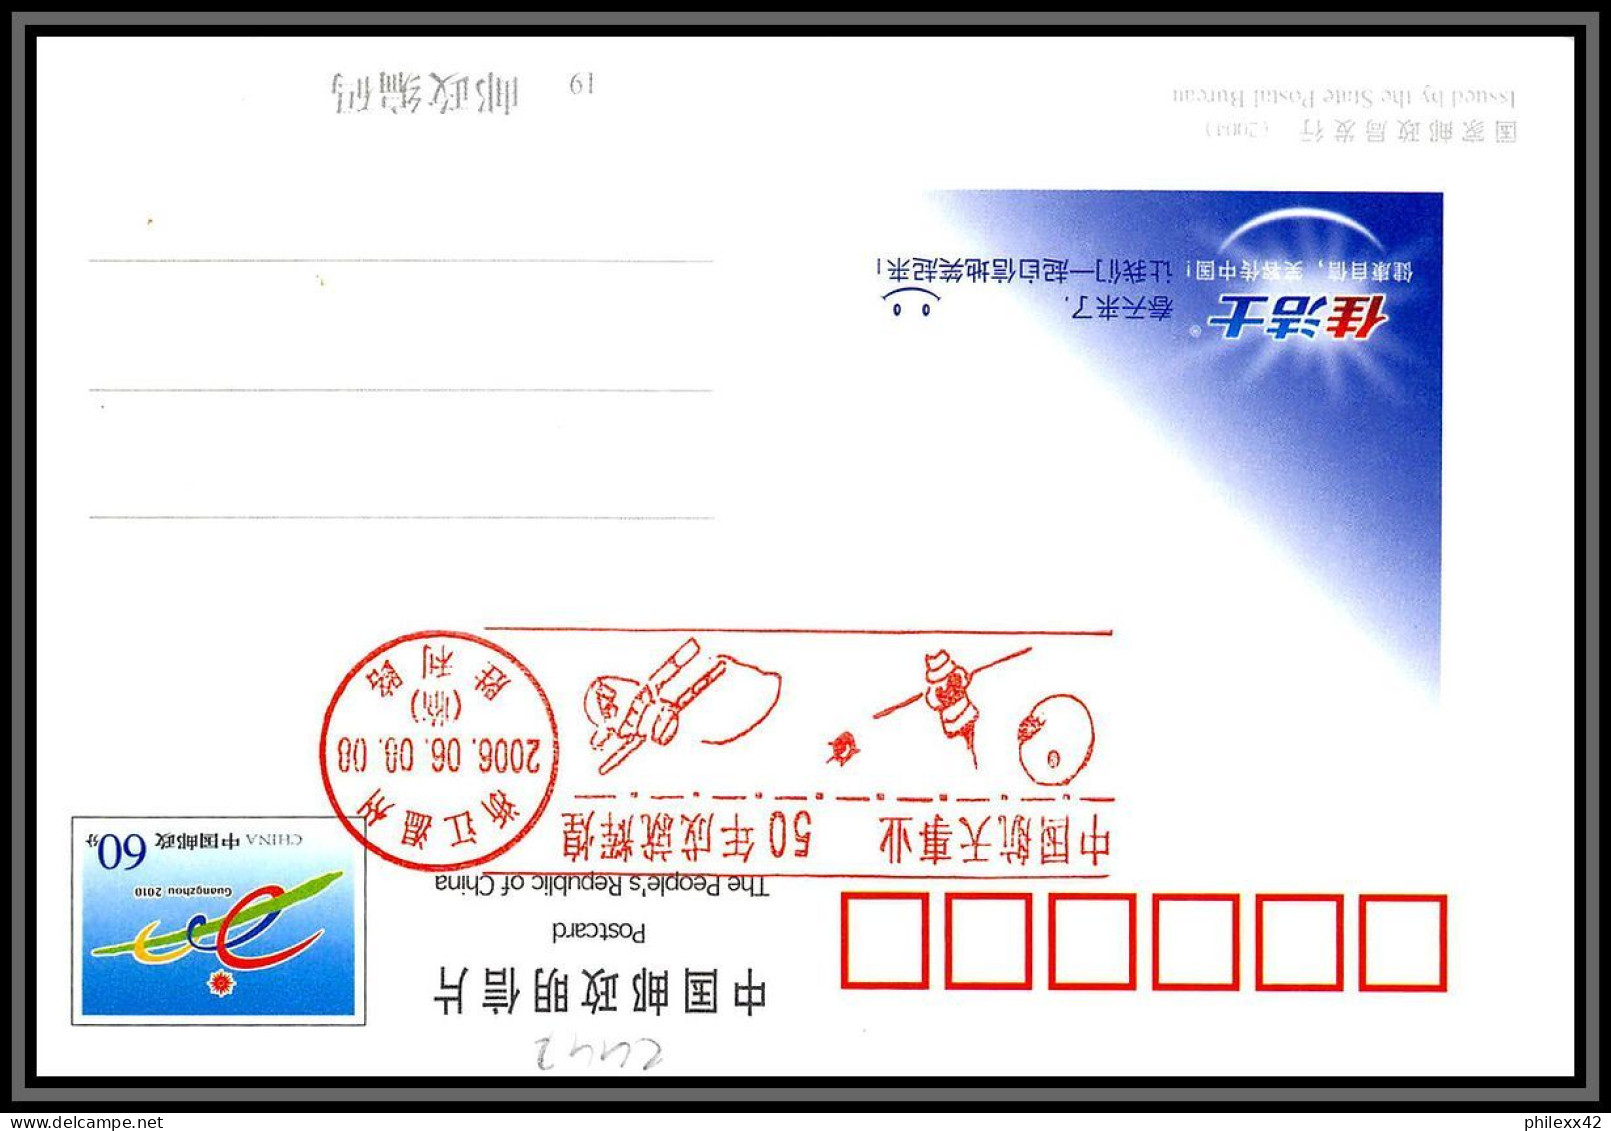 2447 Espace (space Raumfahrt) Lot De 2 Entier Postal (Stamped Stationery) Chine (china) 6/6/2008 - Asia